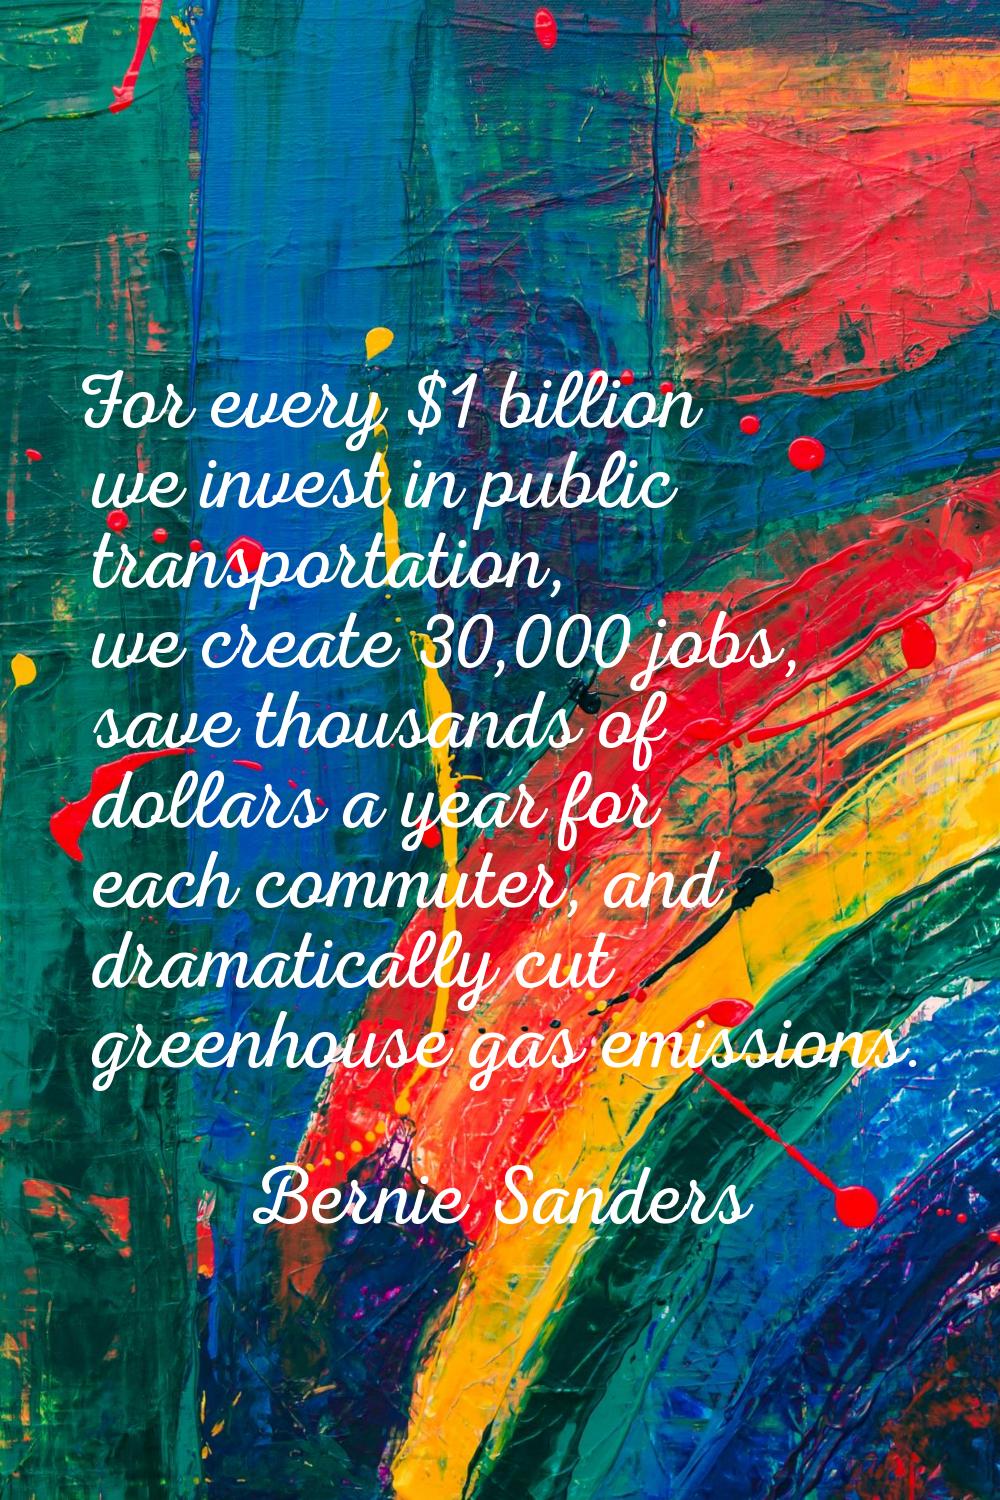 For every $1 billion we invest in public transportation, we create 30,000 jobs, save thousands of d